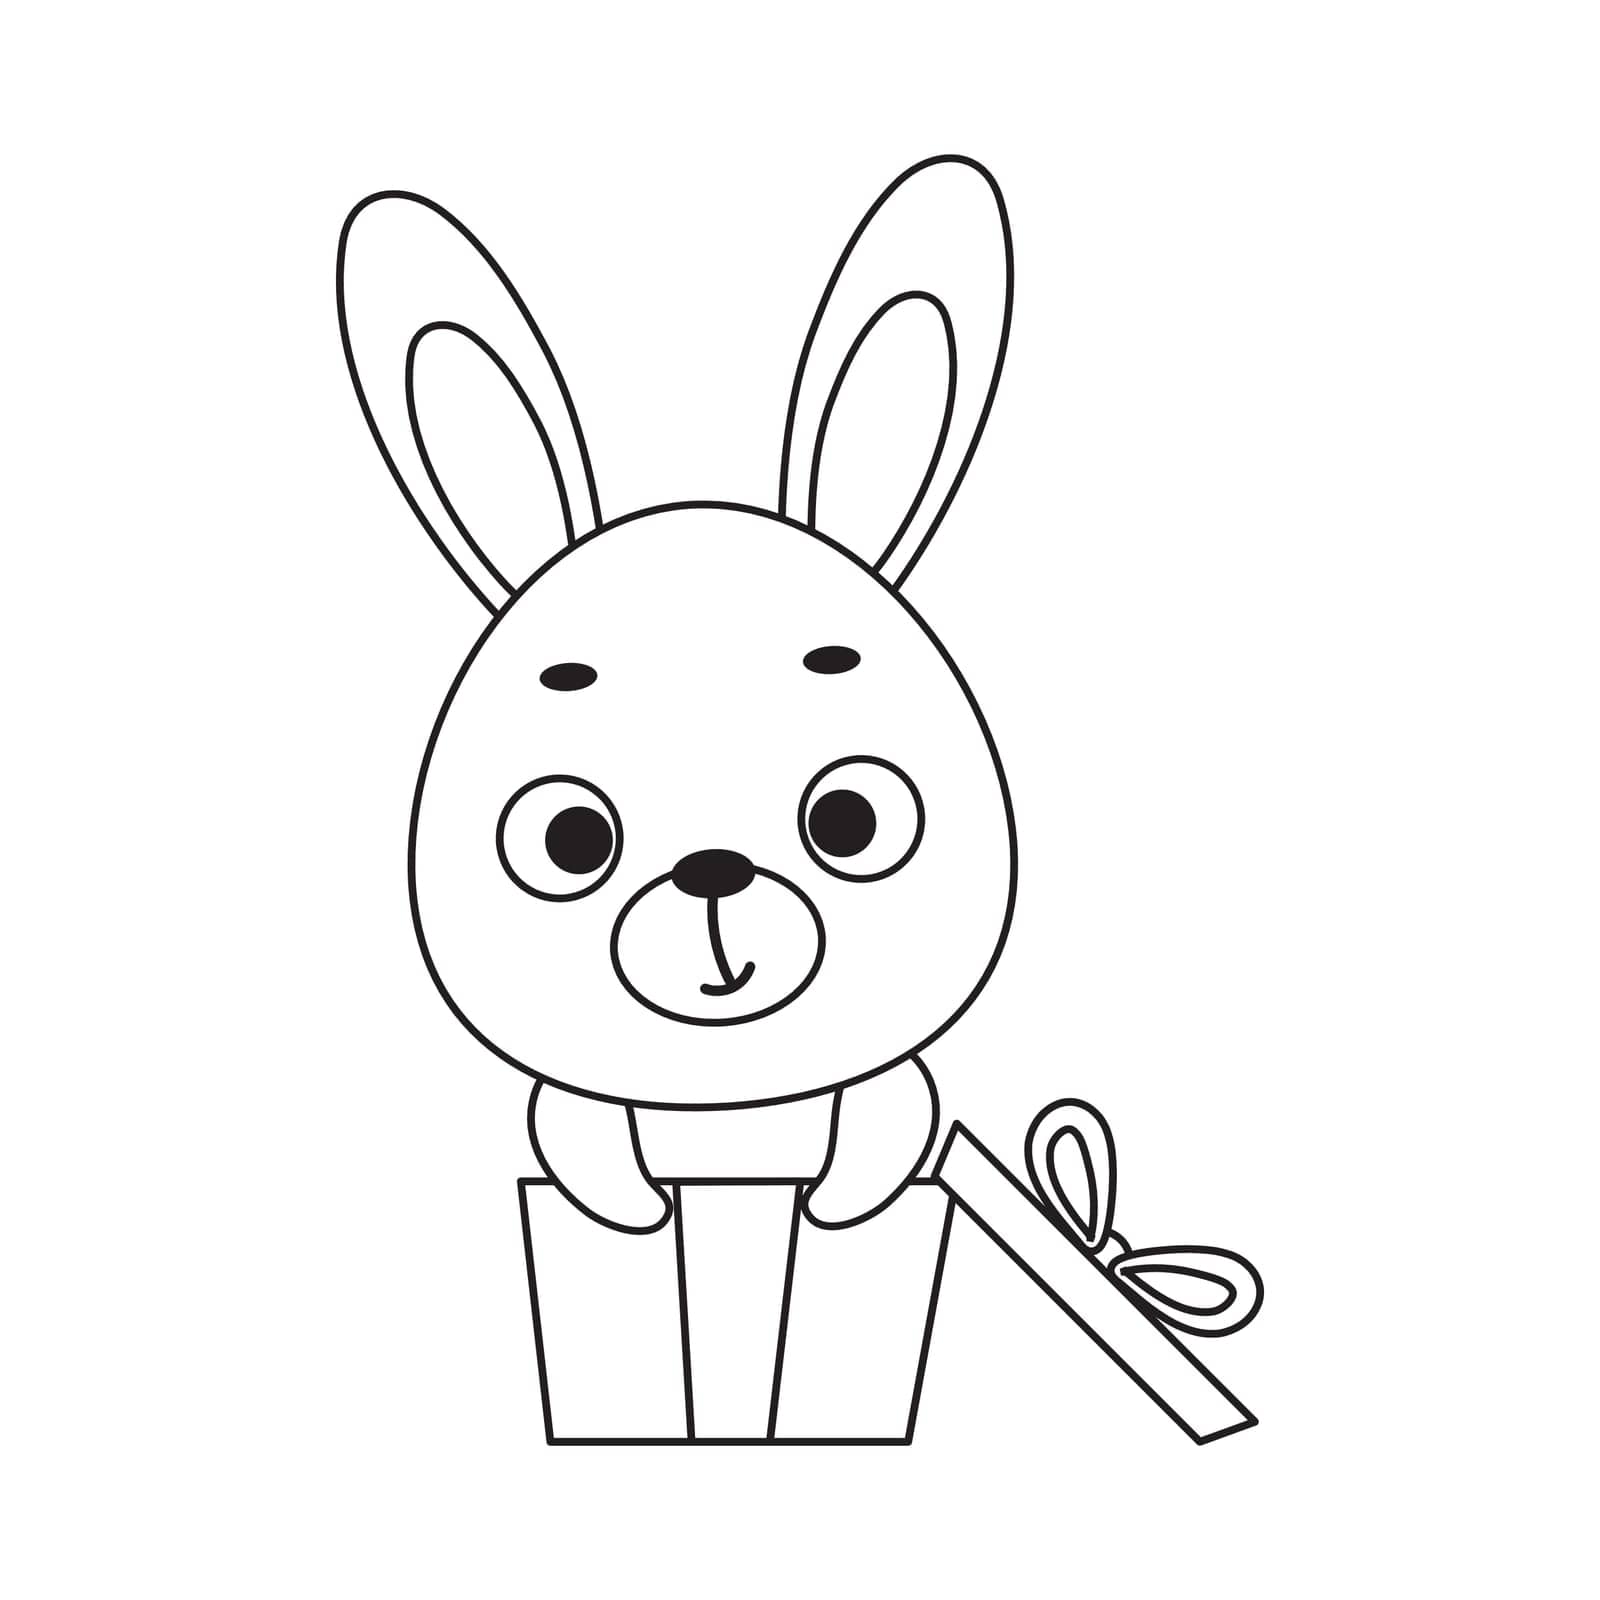 Coloring page cute little hare sitting in gift box. Coloring book for kids. Educational activity for preschool years kids and toddlers with cute animal. Vector stock illustration by Melnyk